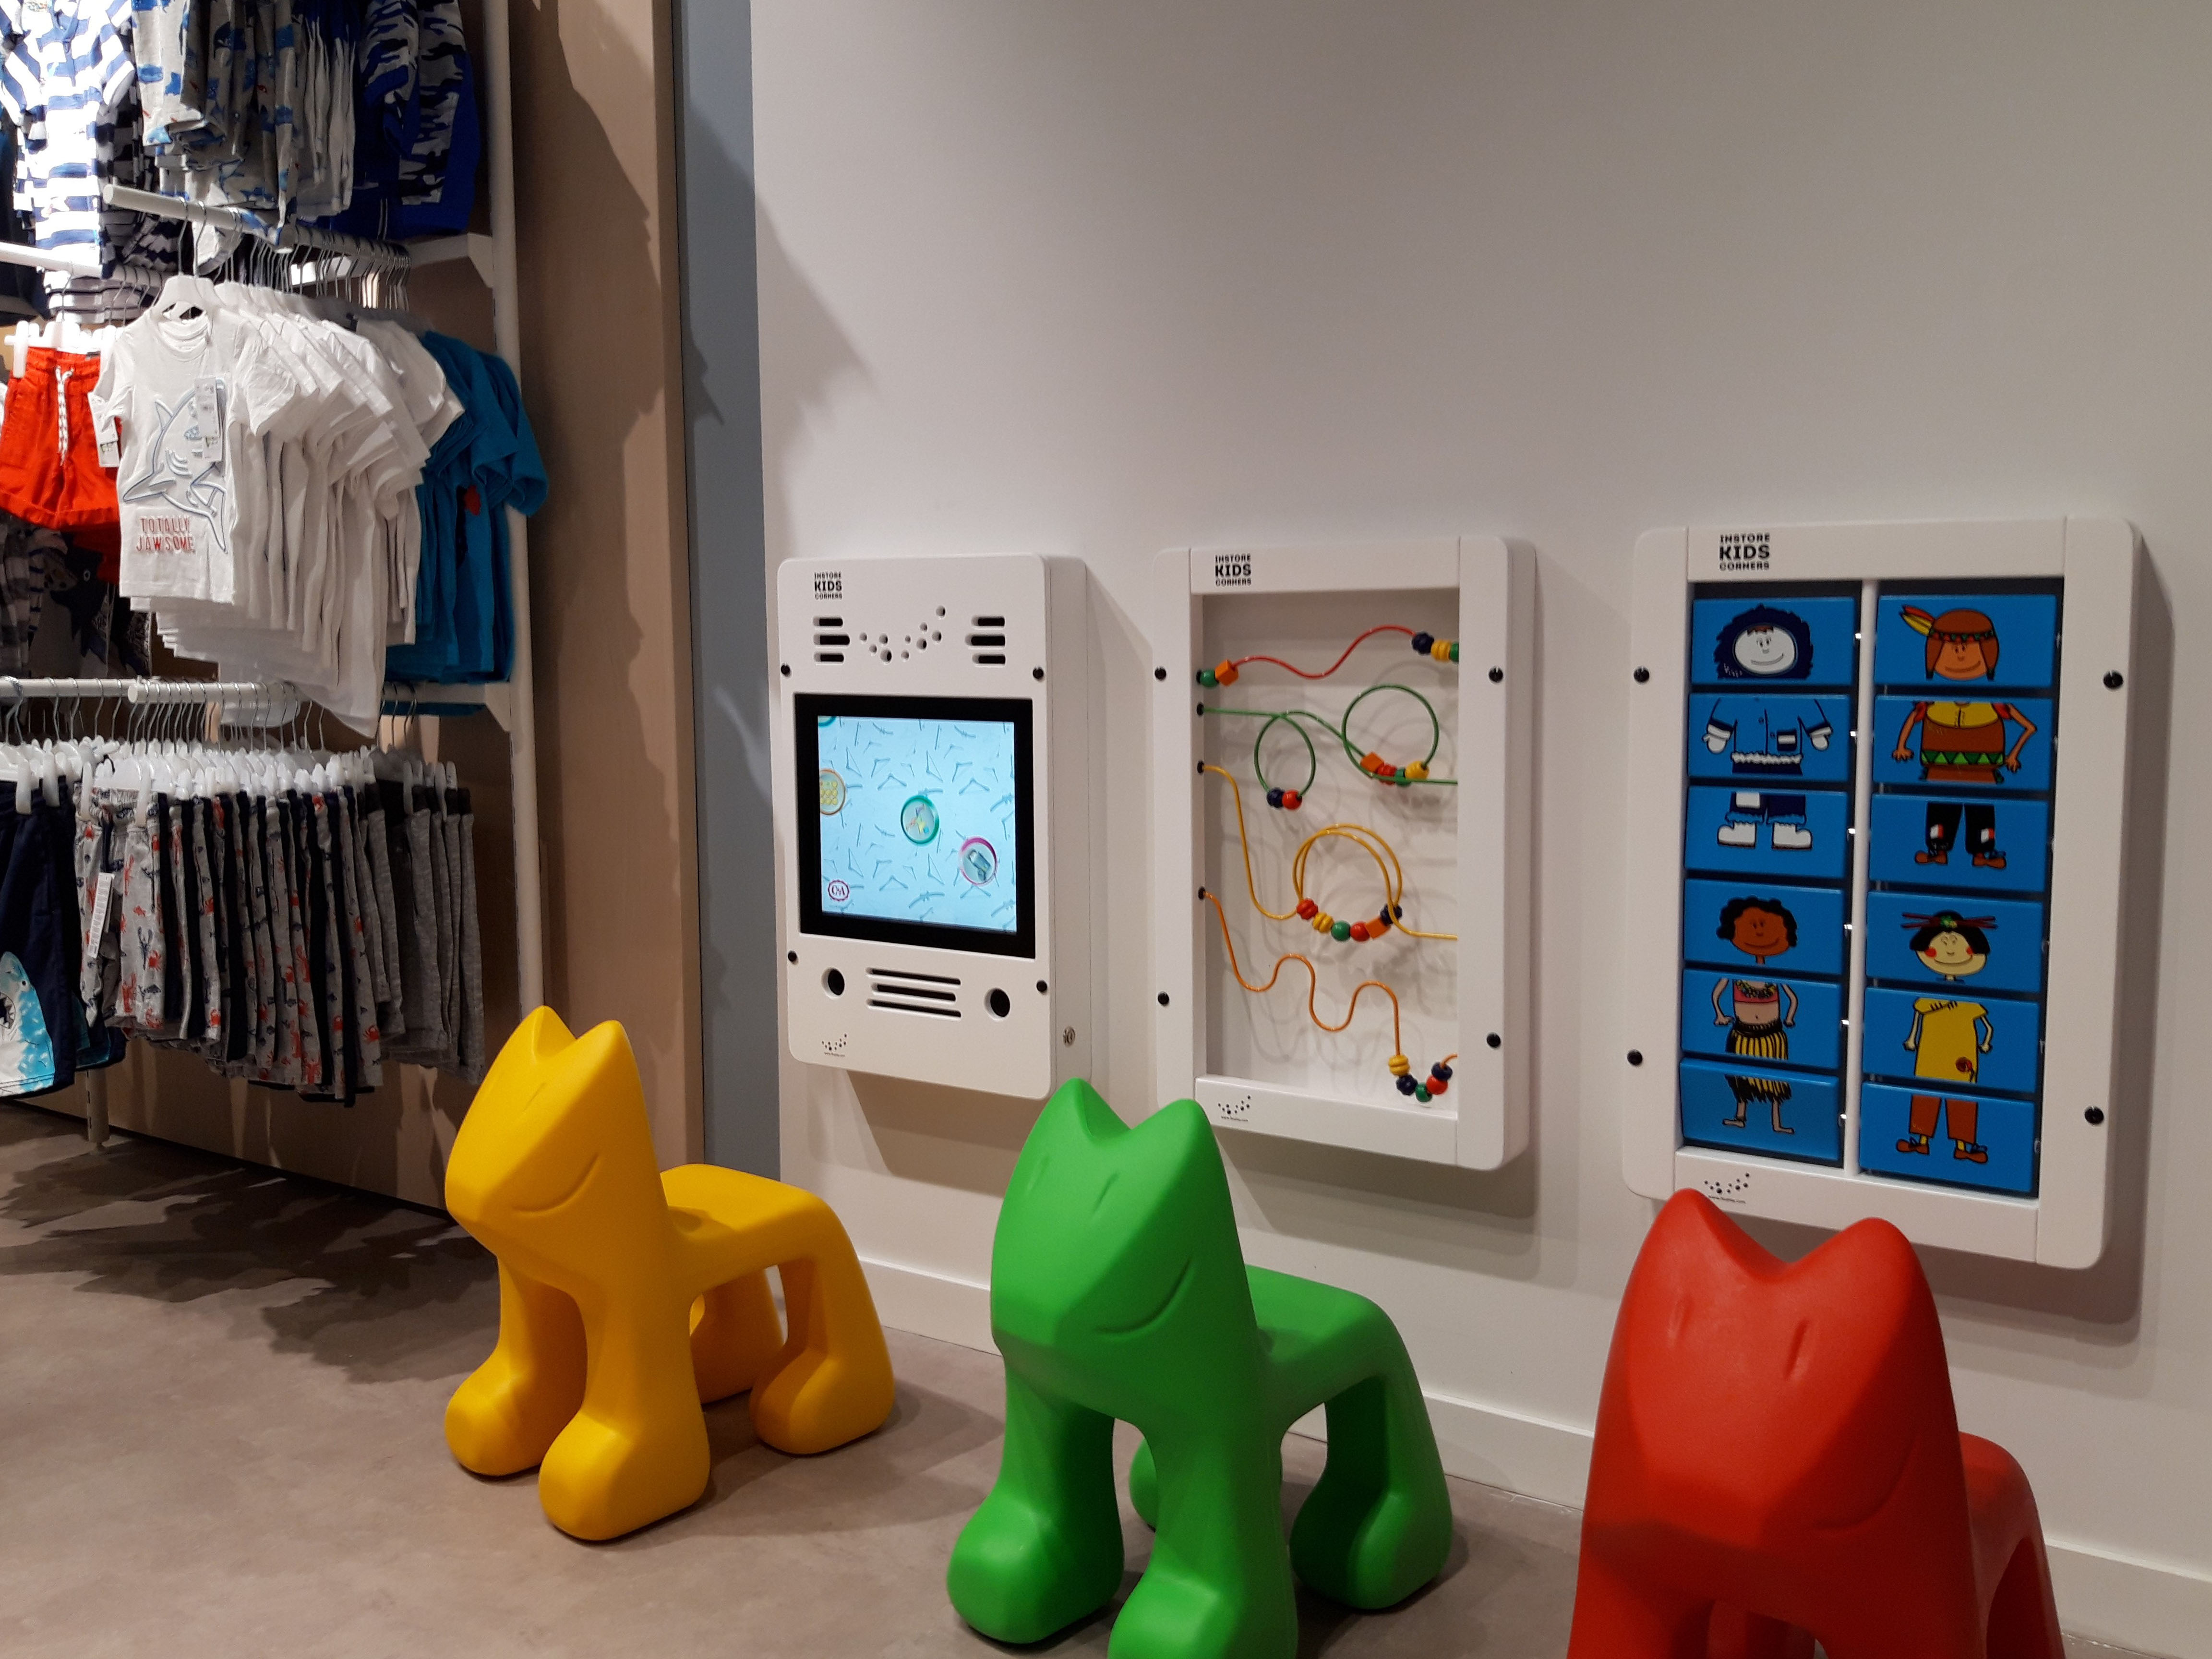 IKC play corner for children at C&A clothing store